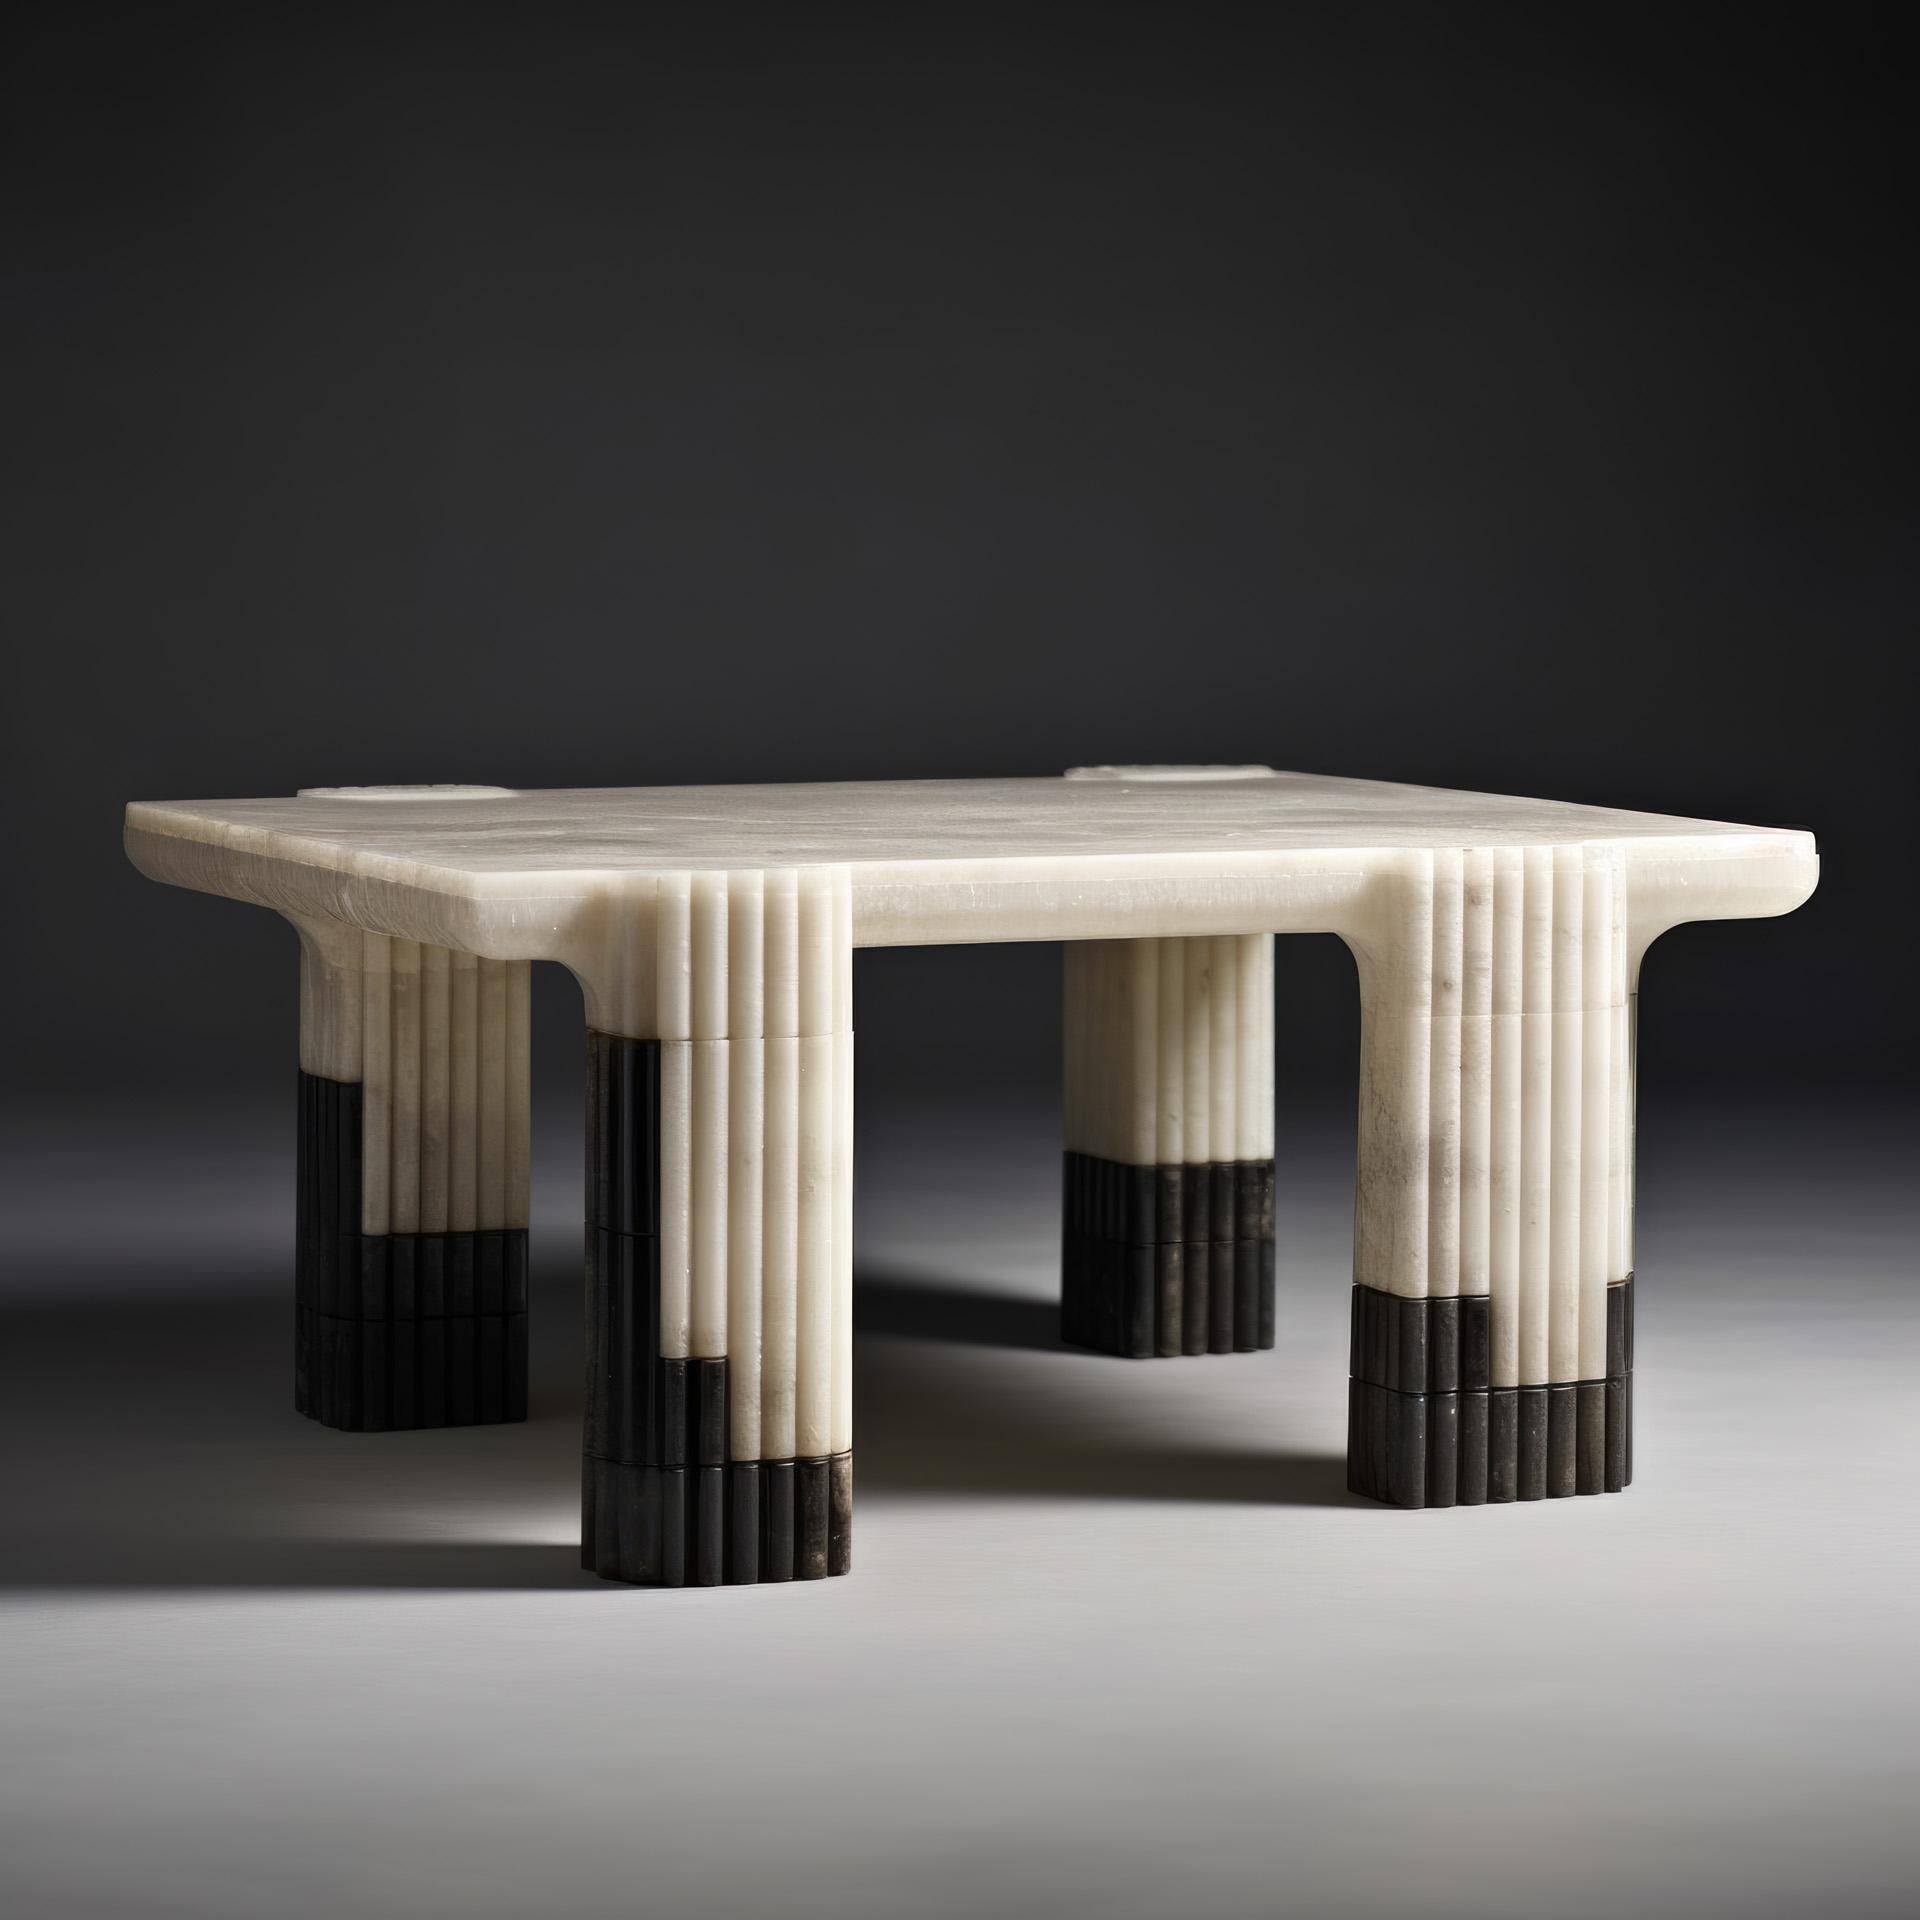 Zhuang Shi Pai Coffee Table by objective OBJECT Studio
Dimensions: D 101.5 x W 106.5 x H 53.5 cm 
Materials: Marble.


objective OBJECT
an embodiment of our architectural ethos.

We represent an unwavering dedication to truth, impartiality, and the